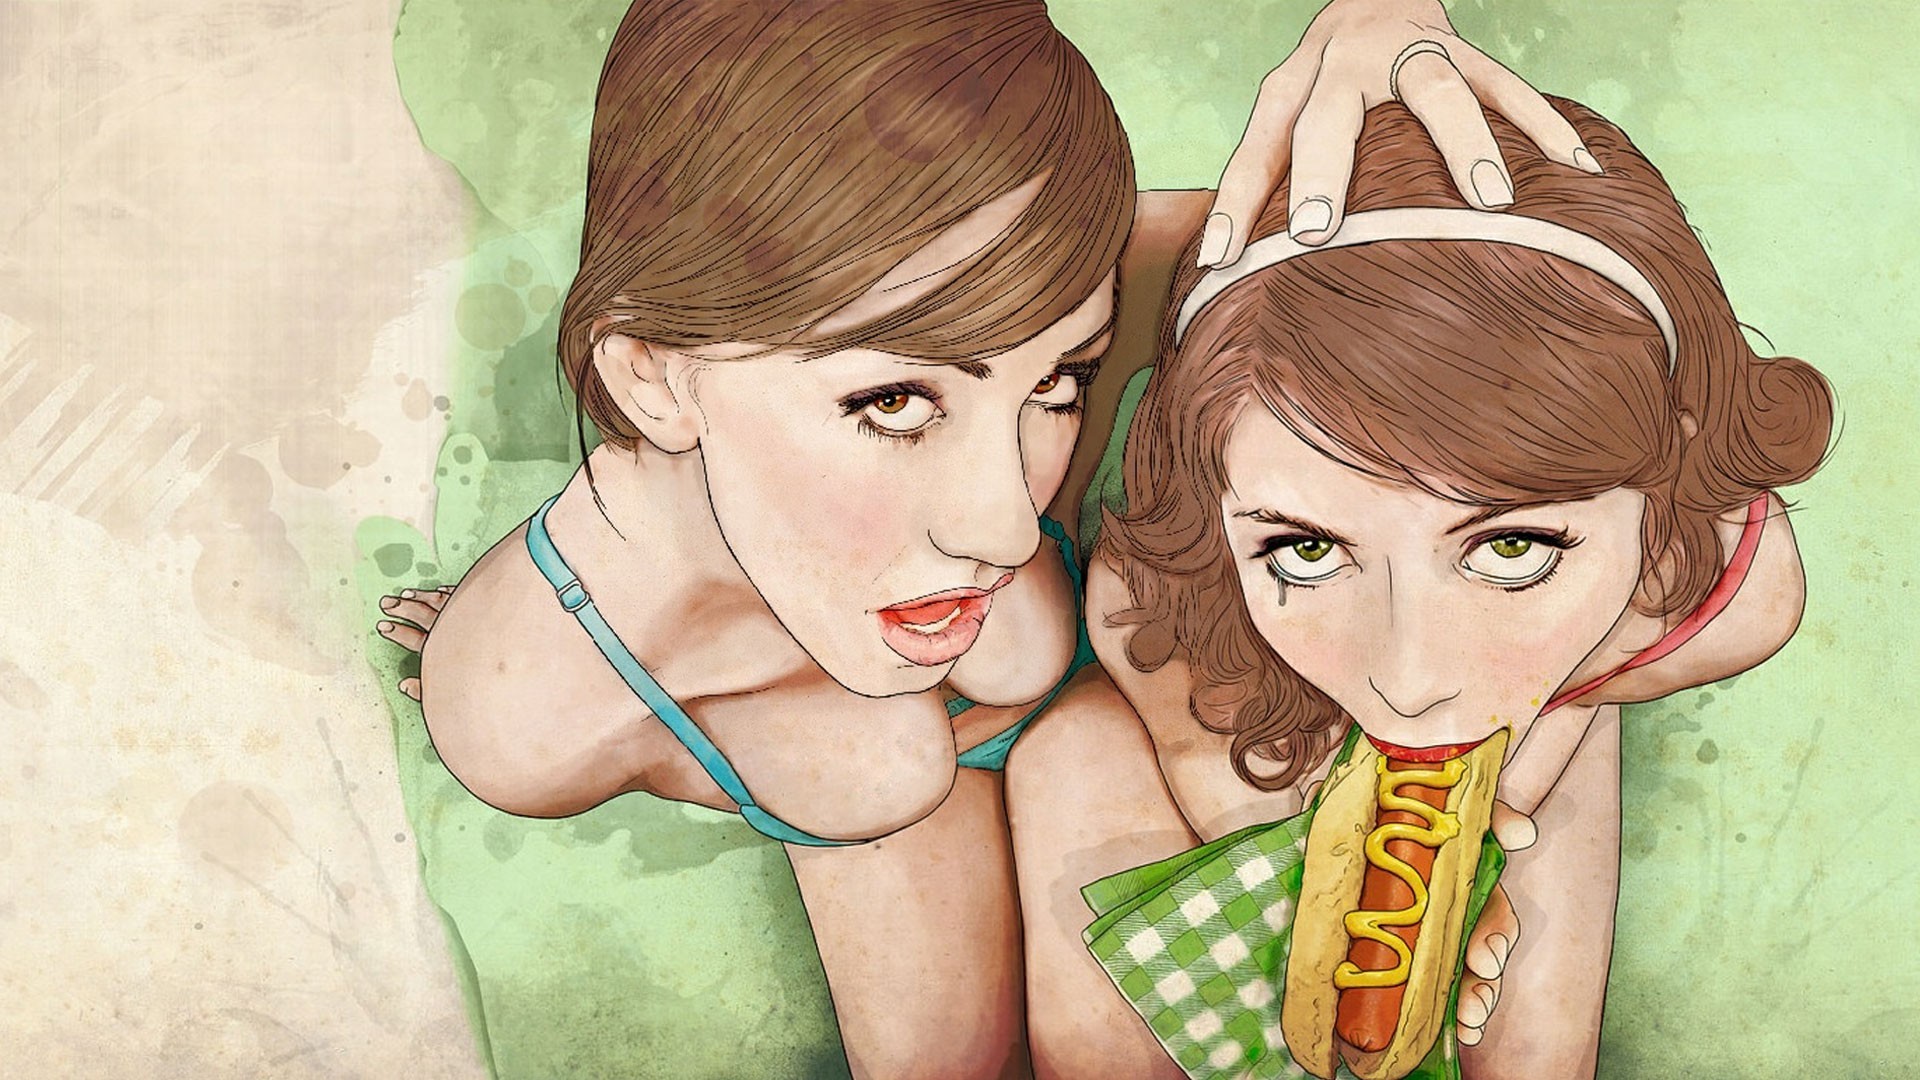 General 1920x1080 cleavage brunette Jennifer White suggestive painting Keith P. Rein artwork hot dogs phallic symbol Ashlyn Rae boobs tears food pornstar sausage looking at viewer teeth looking up open mouth hands on head high angle women makeup parody headband eating mustard